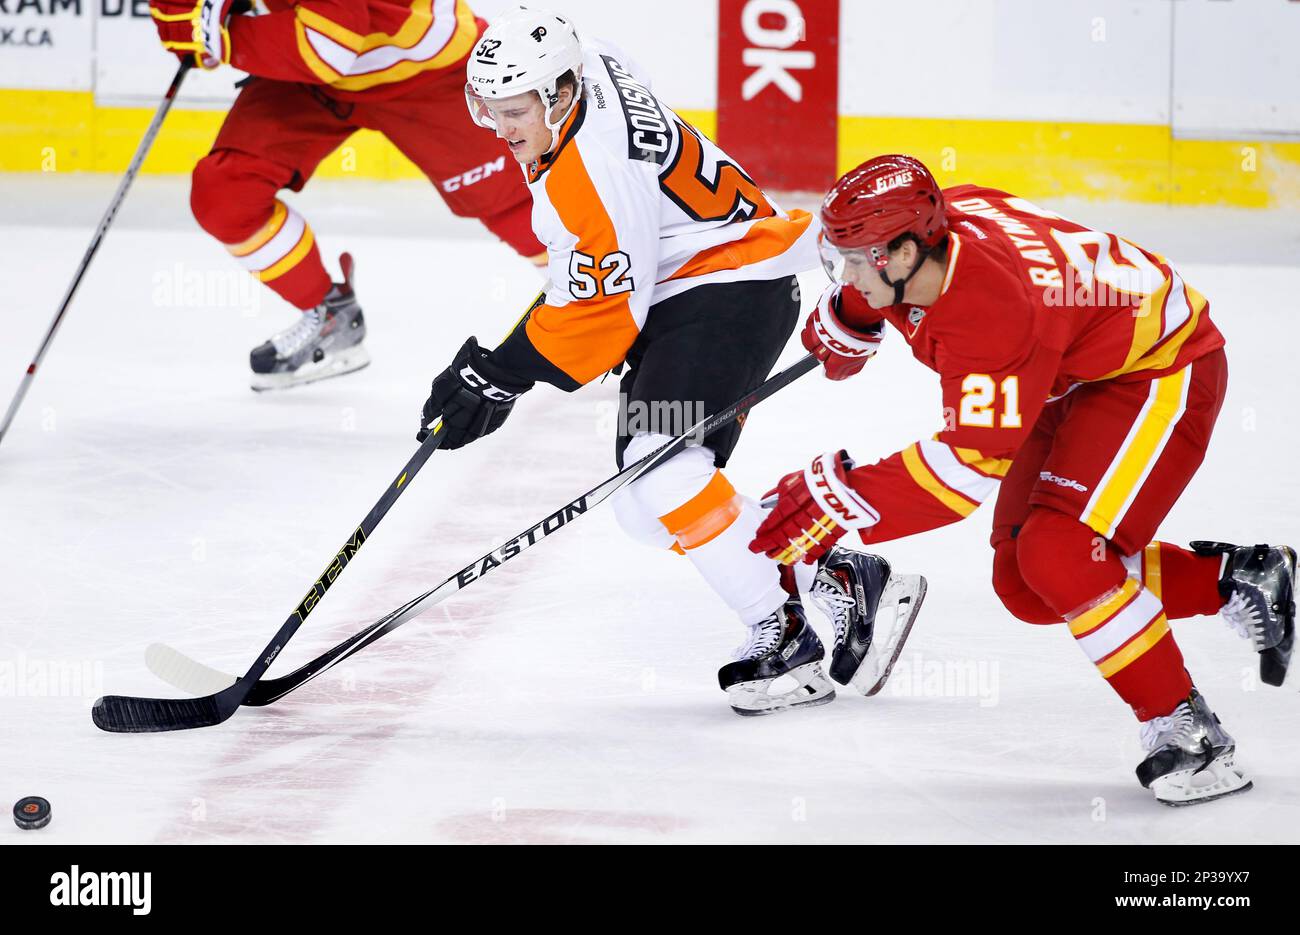 How the Flyers could land Calgary Flames' Johnny Gaudreau in NHL